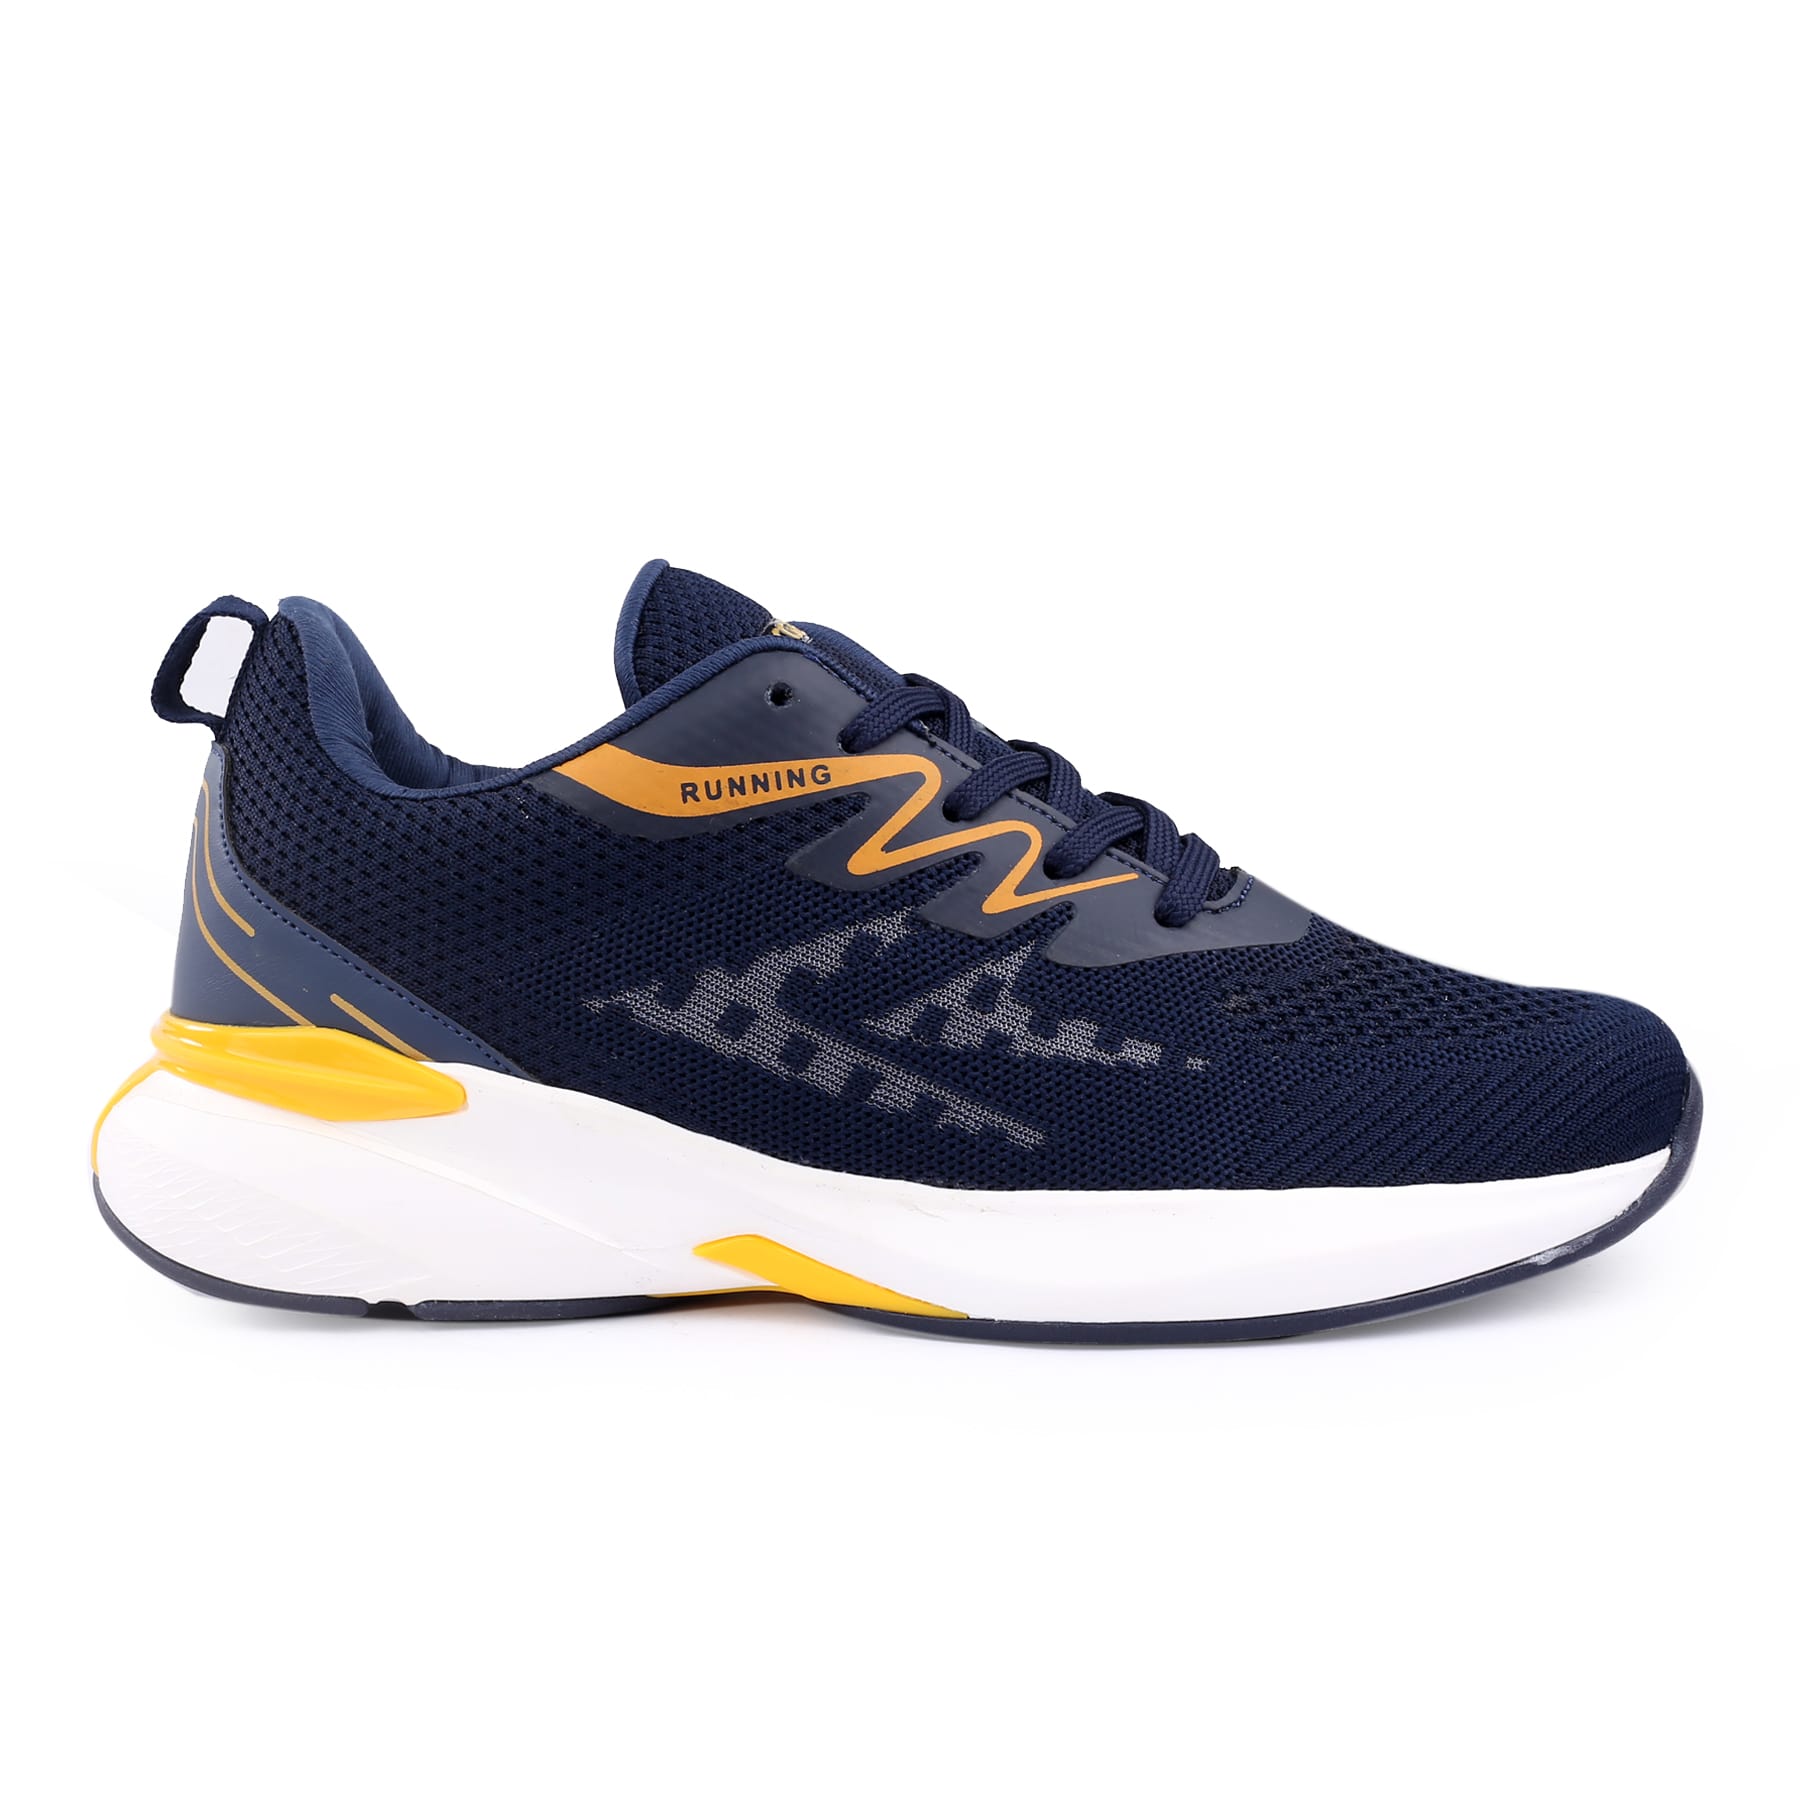 Bacca Bucci MARATHON Everyday Running/Training Shoe with High Abrasion Rubber Outsole with Molded EVA Sockliner